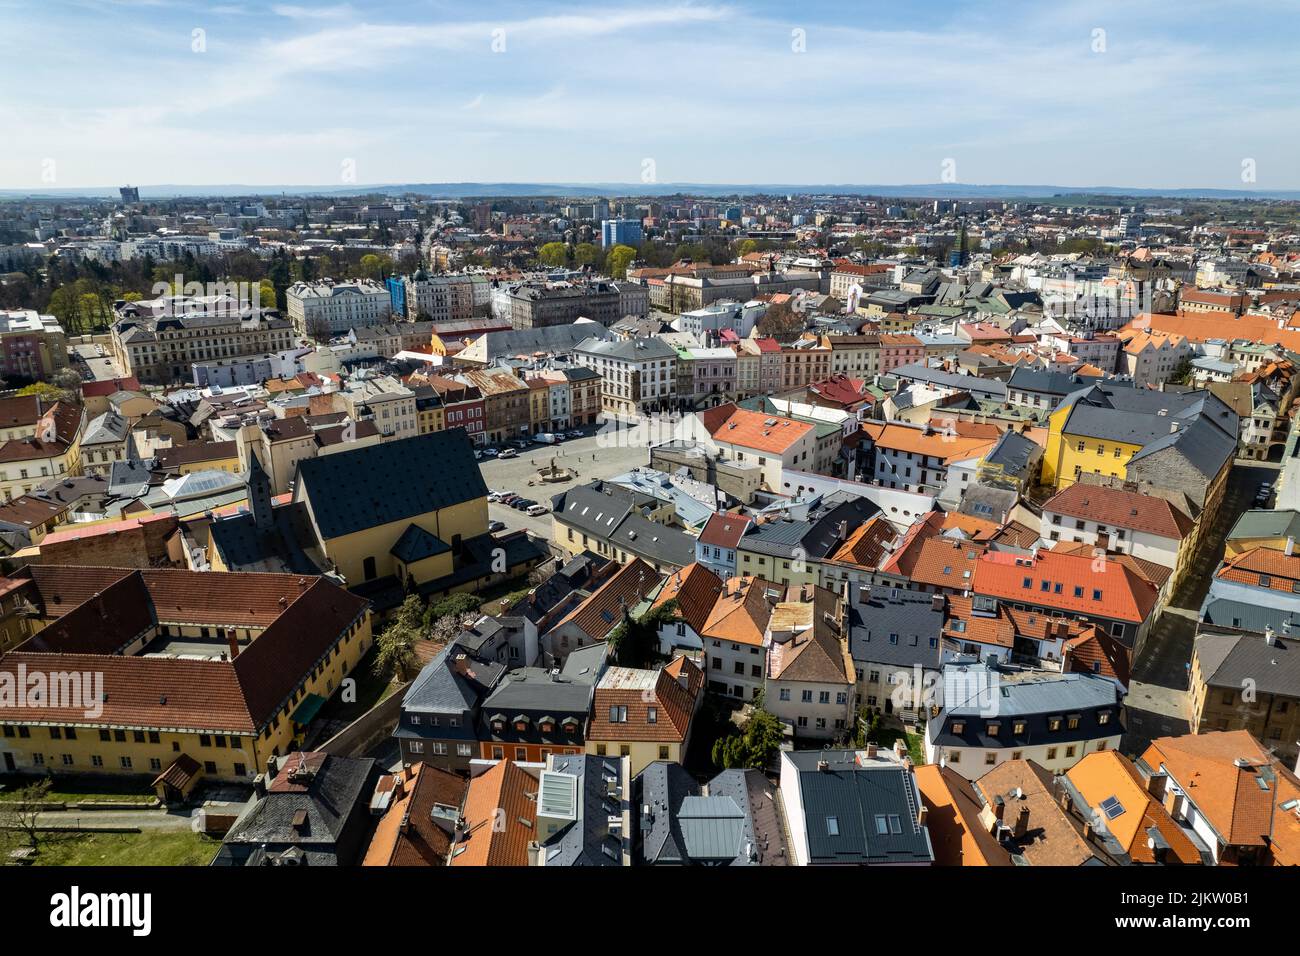 An aerial view of Olomouc city in the Czech Republic Stock Photo